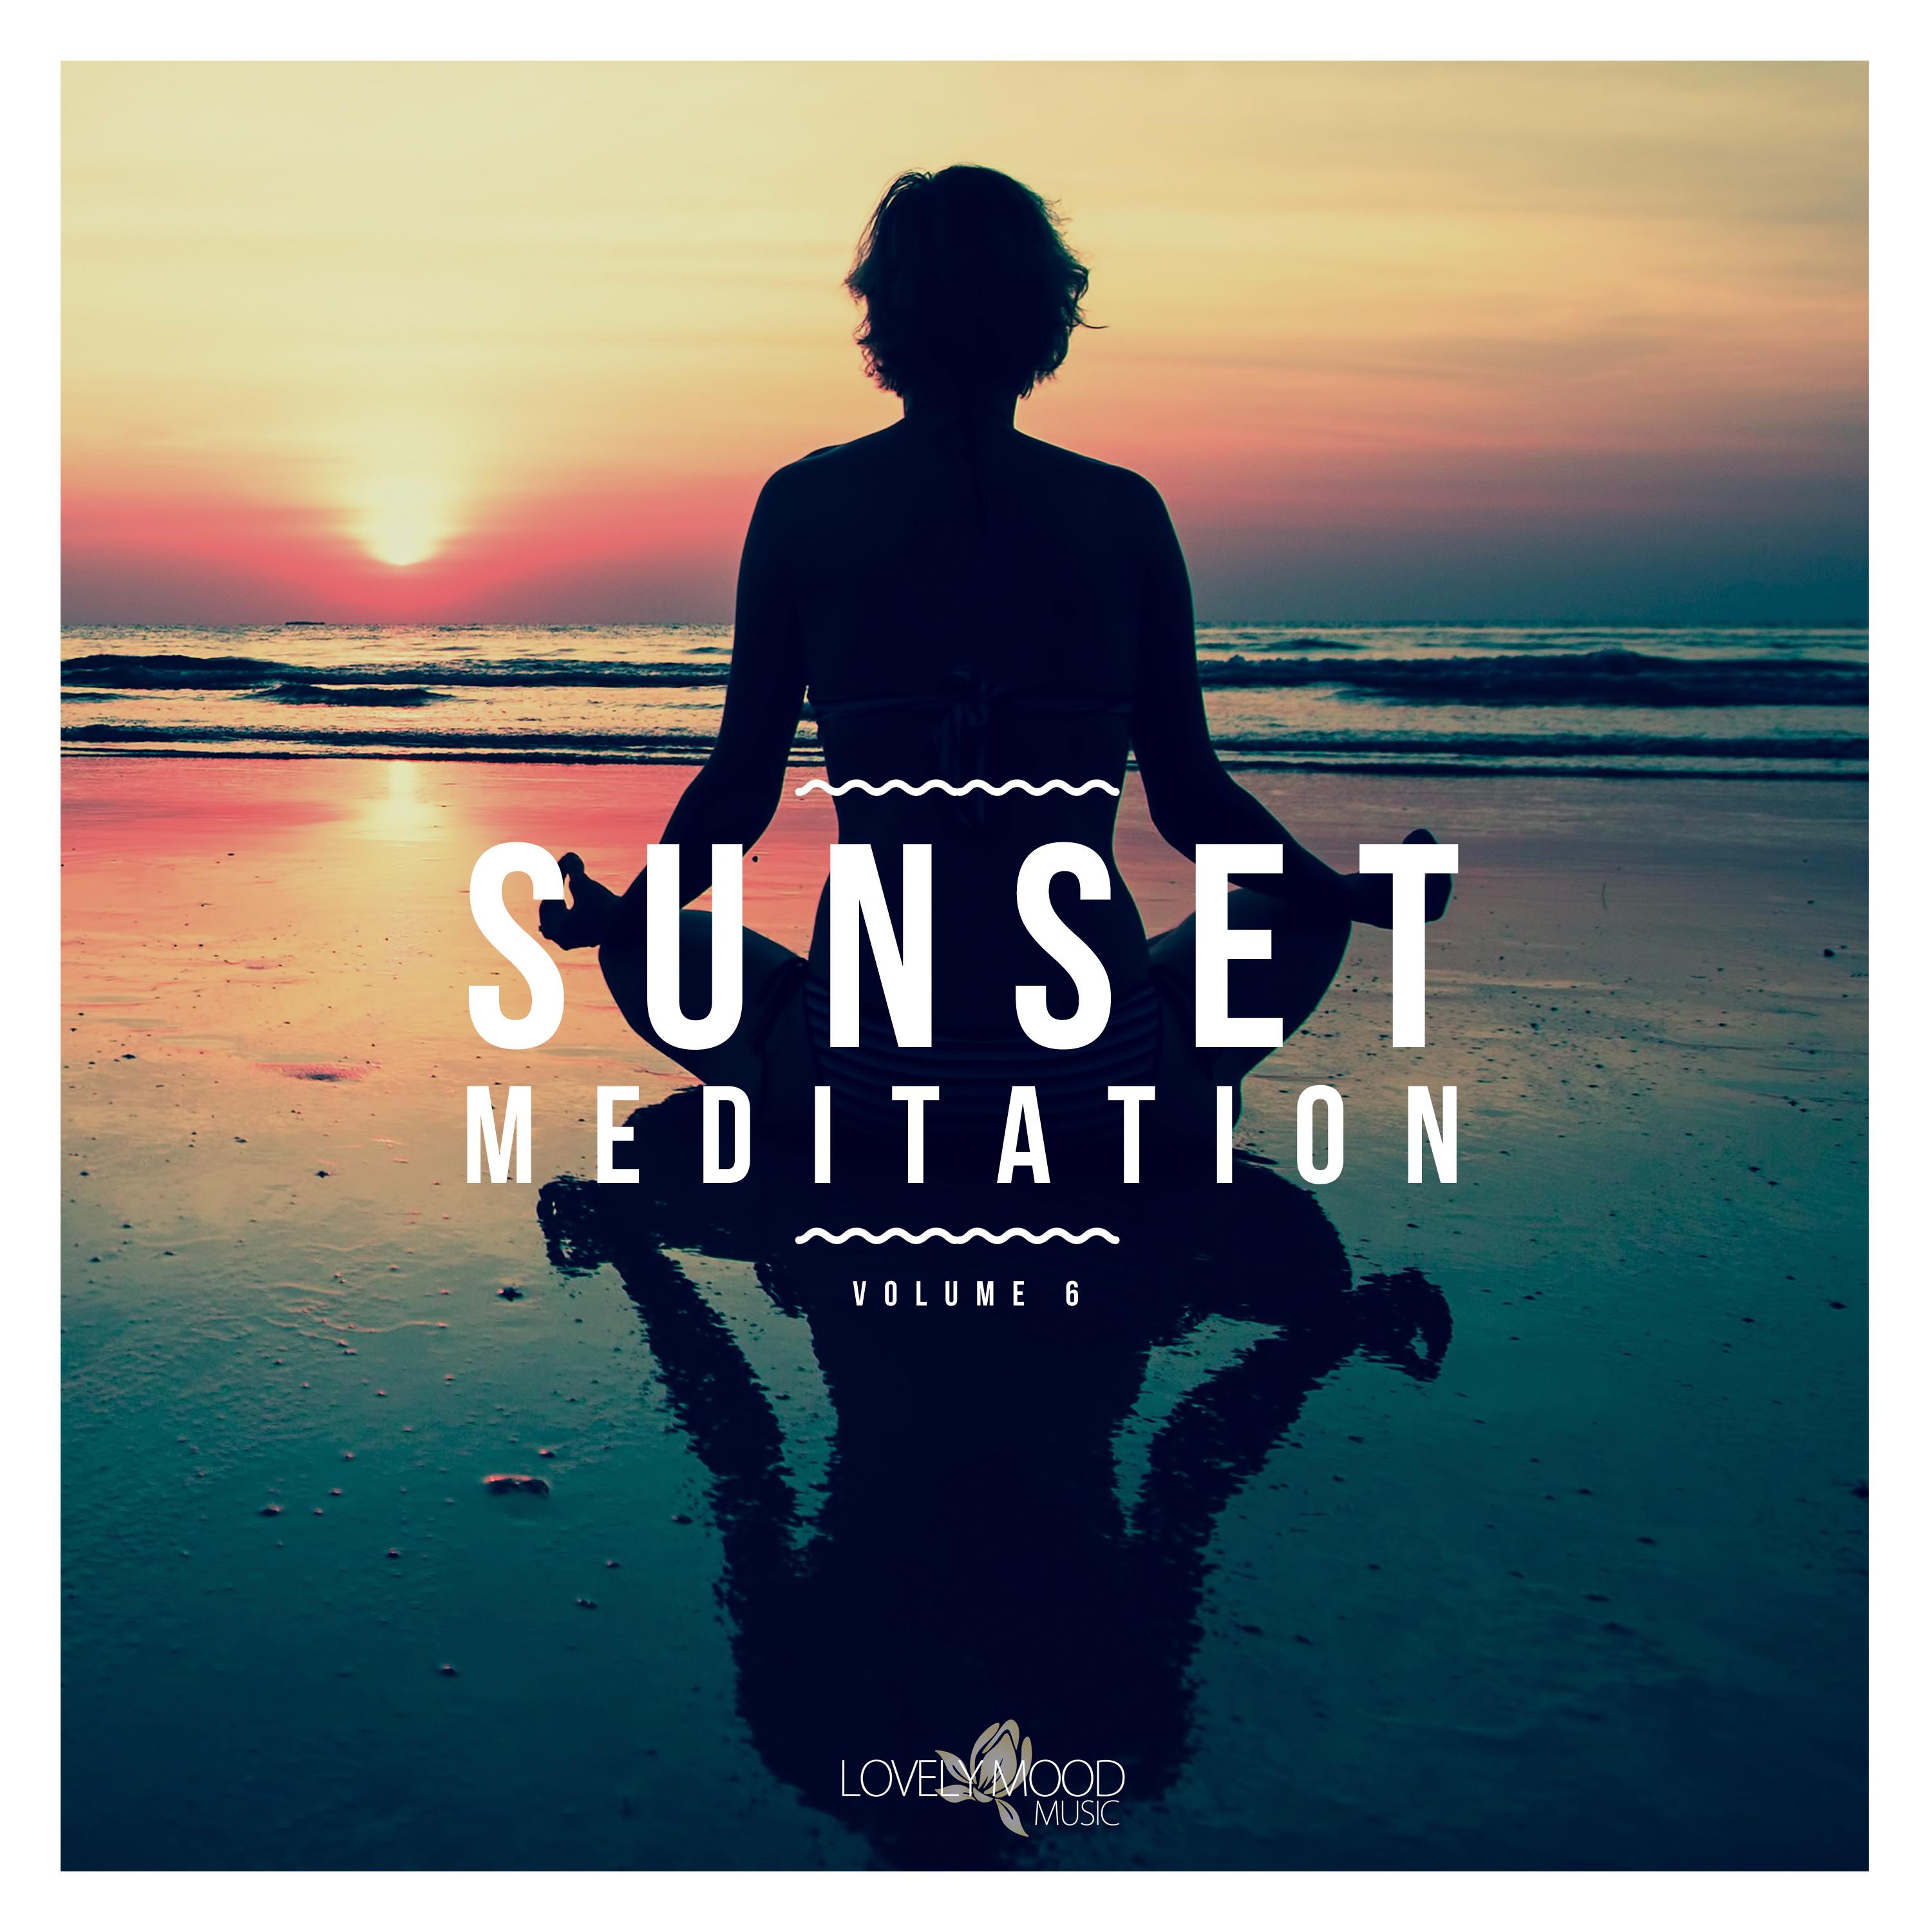 Sunset Meditation - Relaxing Chill Out Music, Vol. 6